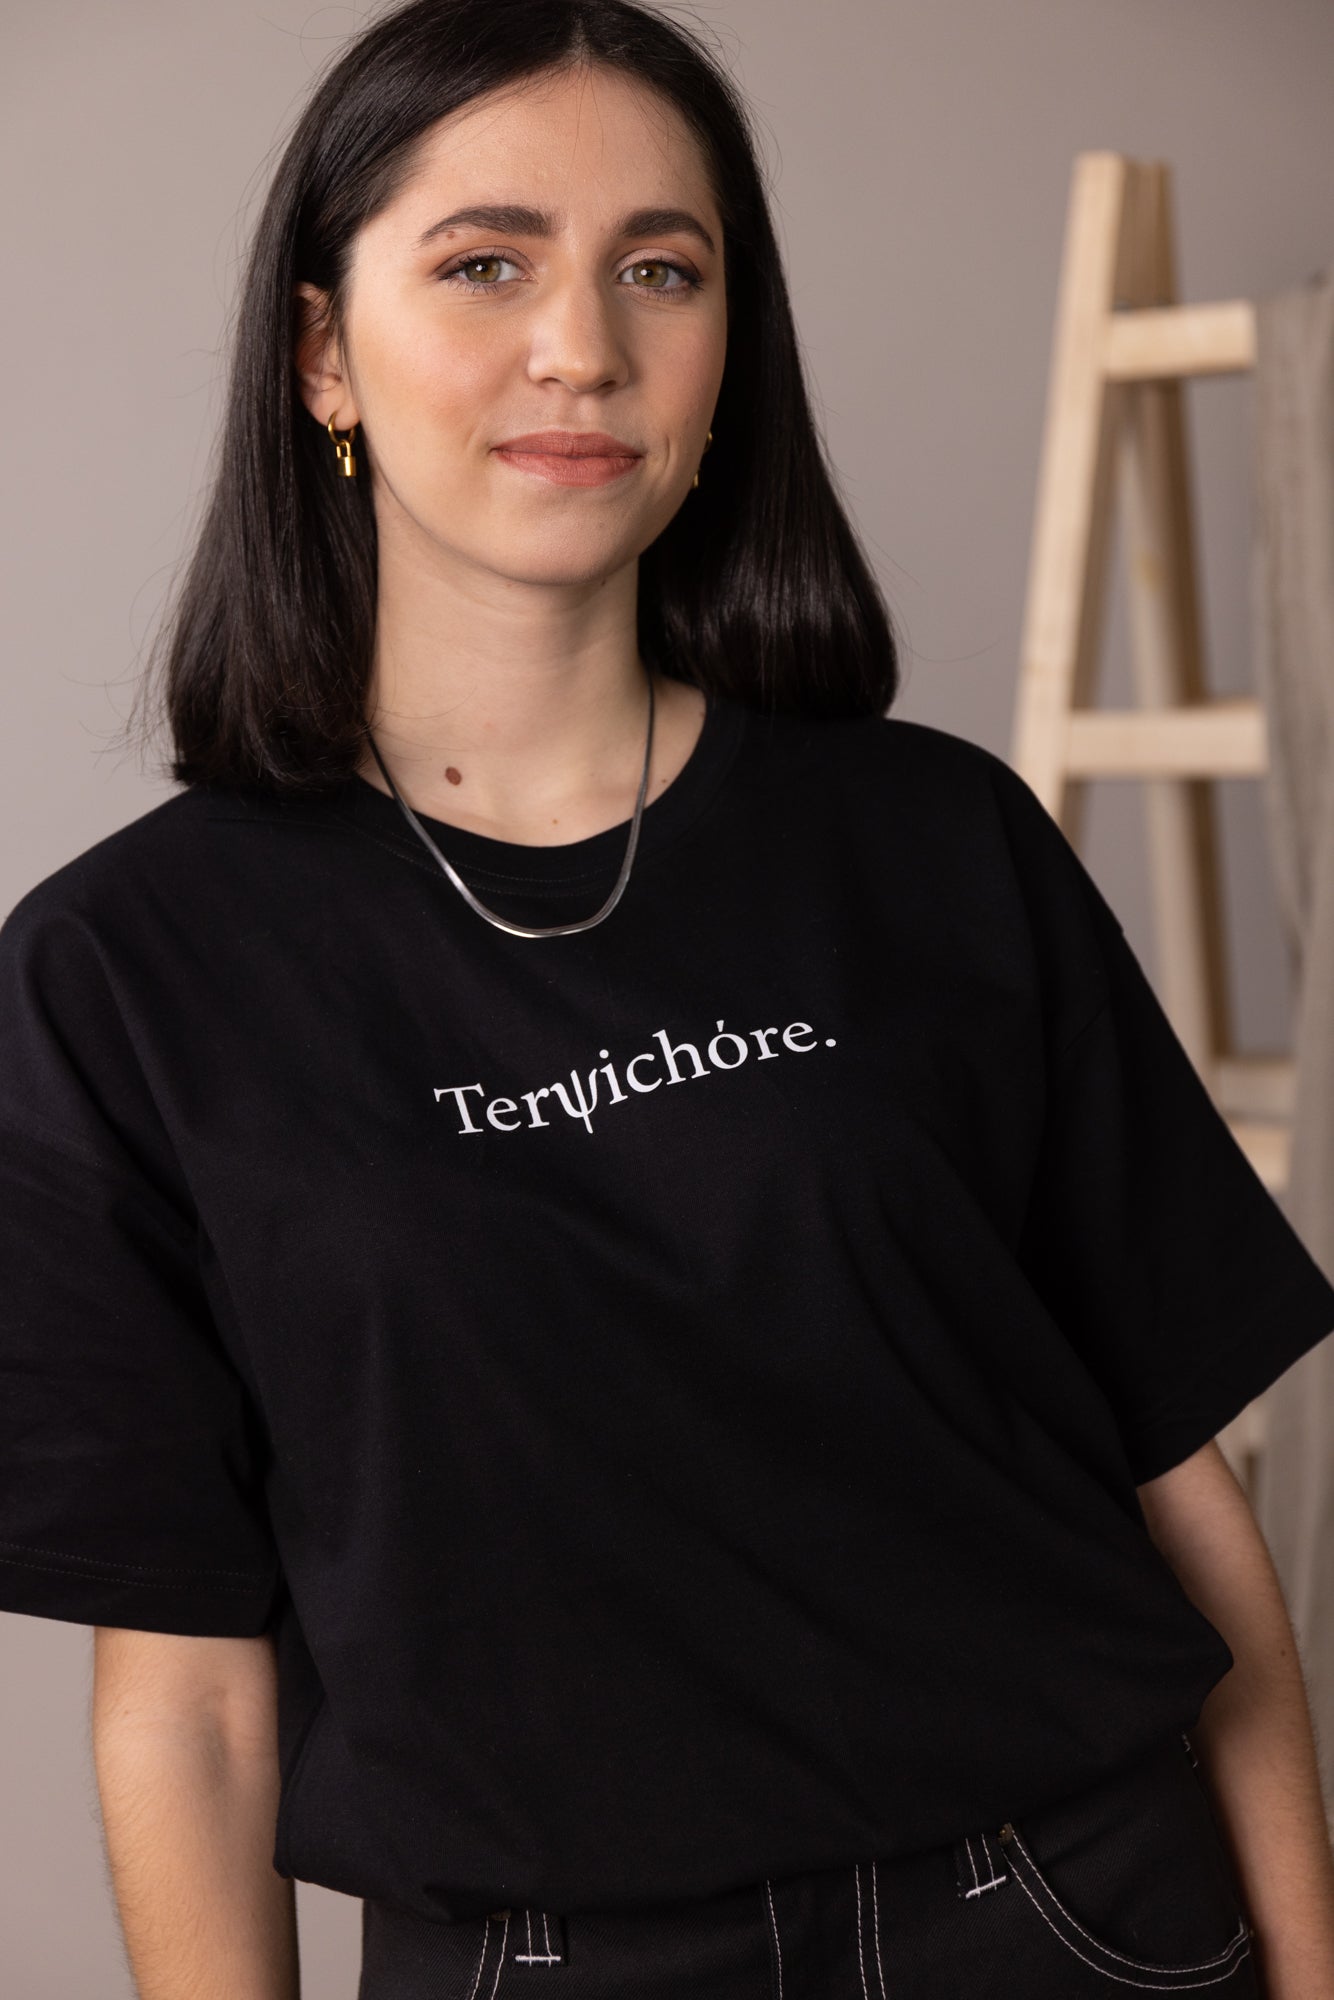 Terpsichore- The MUSA Explained Tee